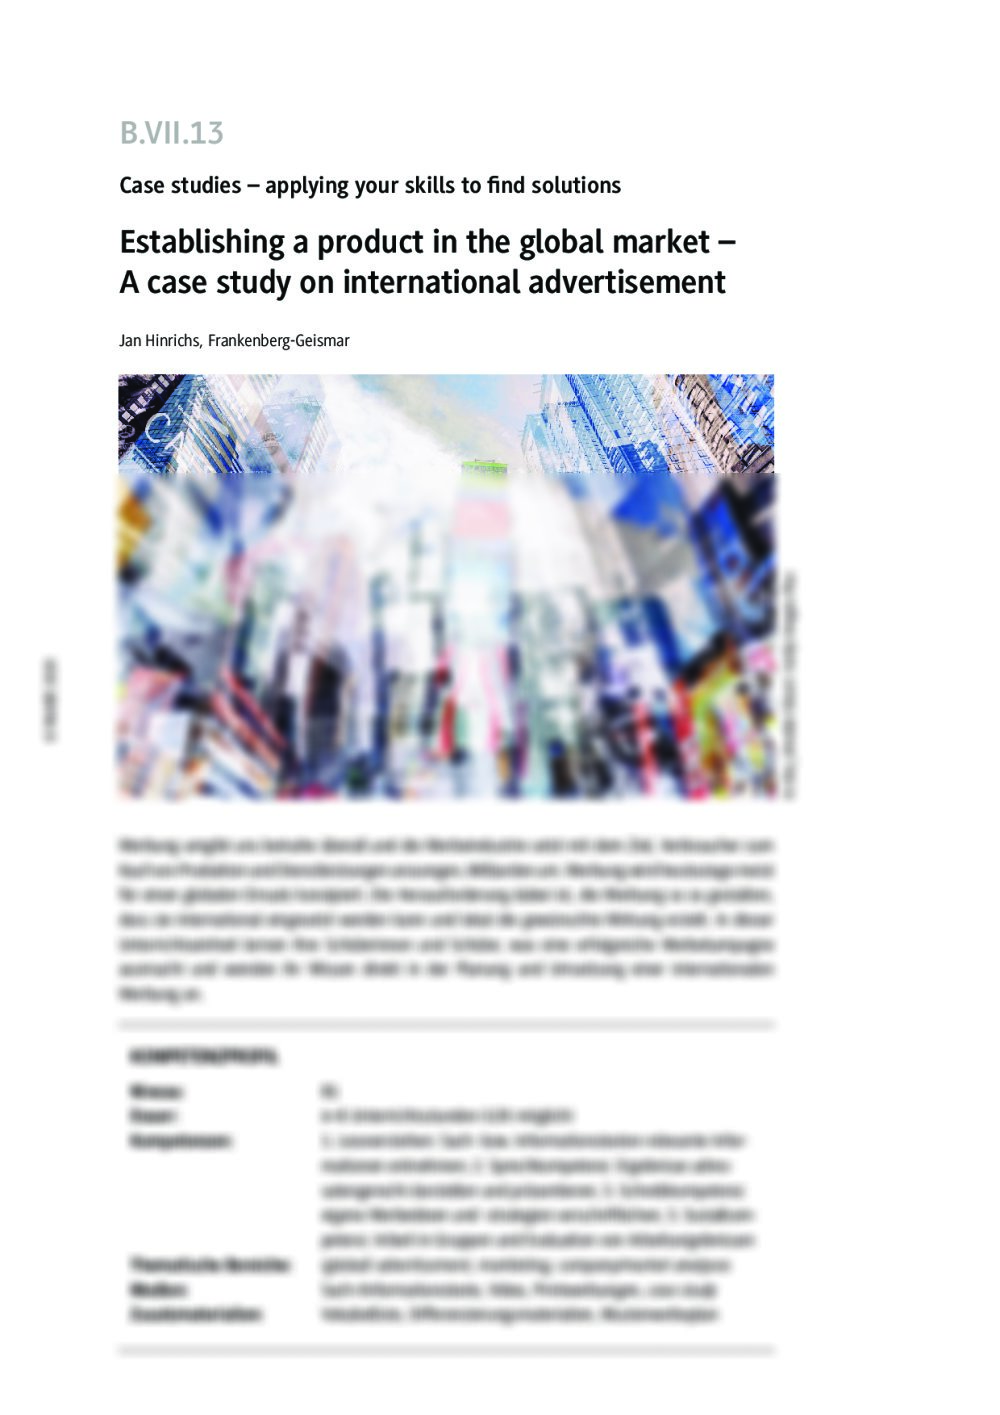 Establishing a product in the global market - Seite 1